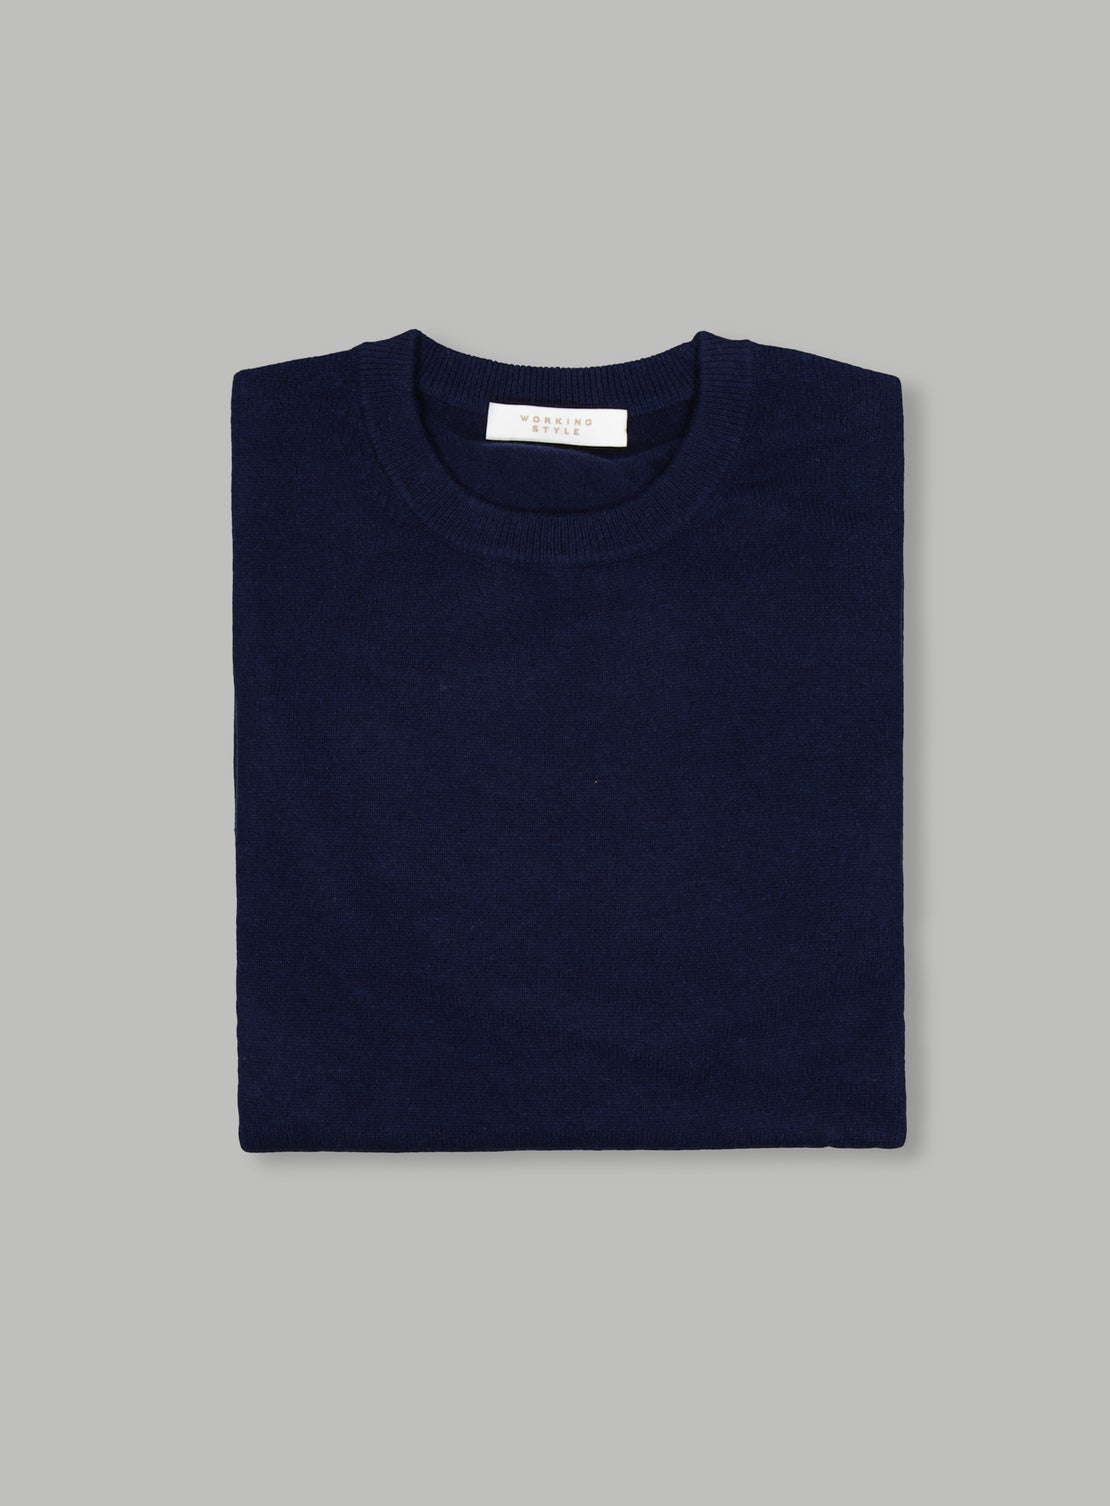 Luxe Navy Cashmere Crew Knit